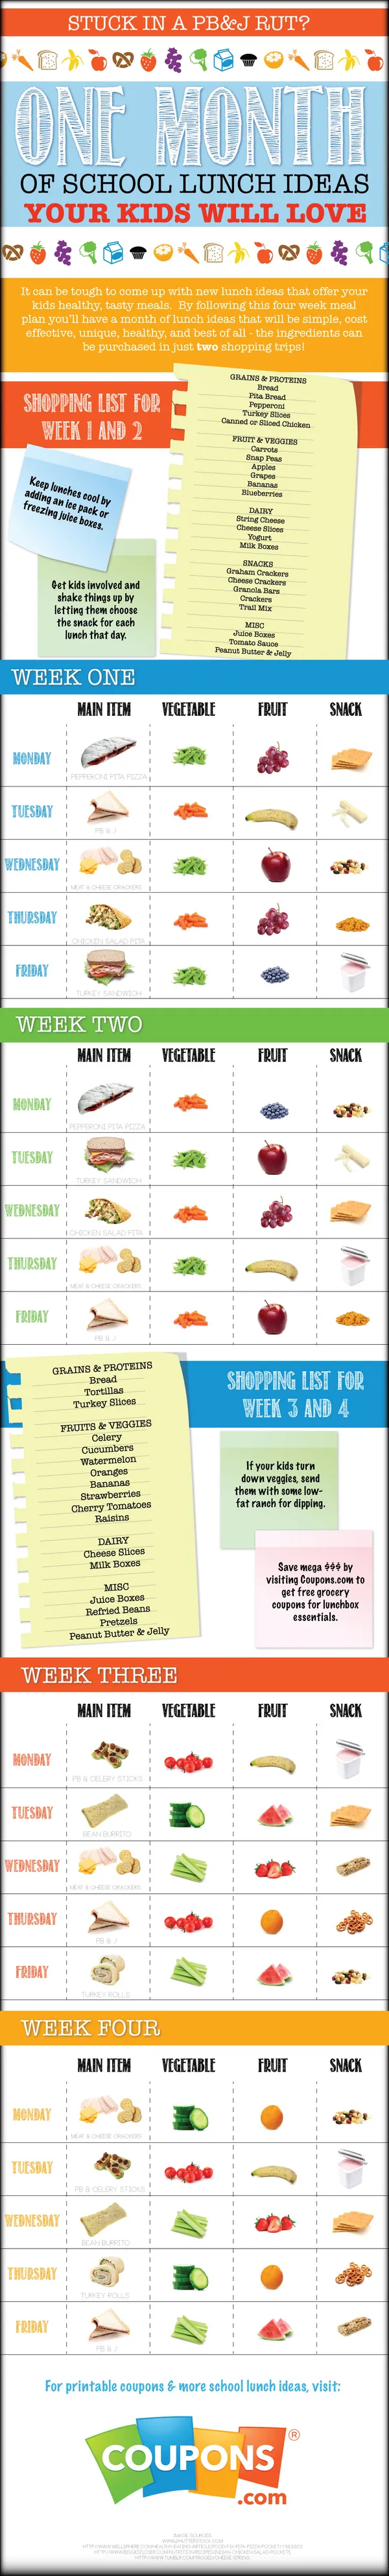 Infographic-School-Lunches-FINAL